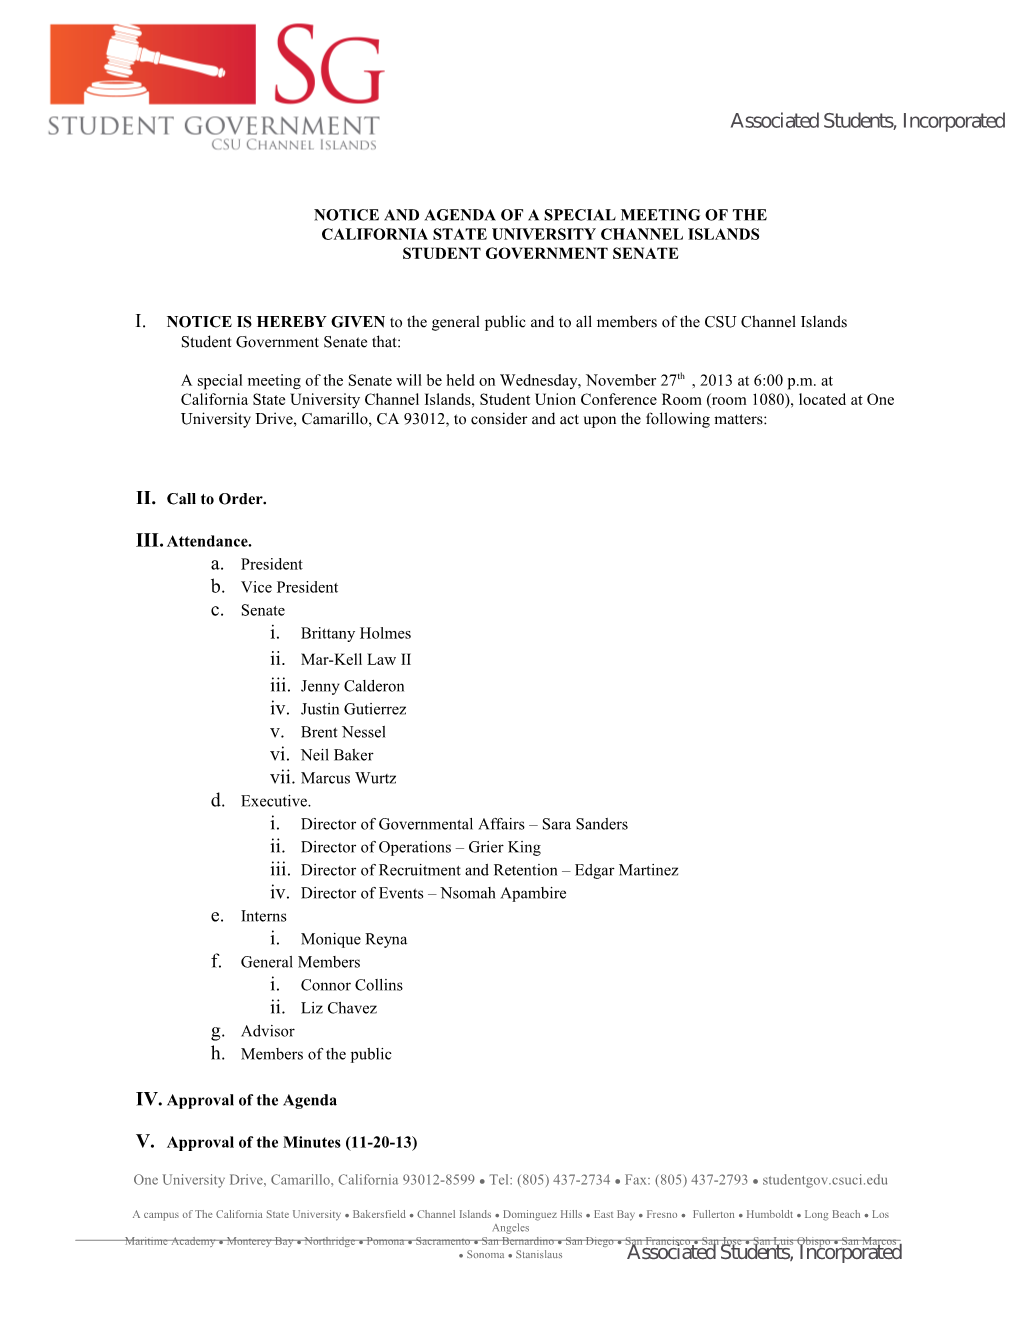 Notice and Agenda of a Special Meeting of The